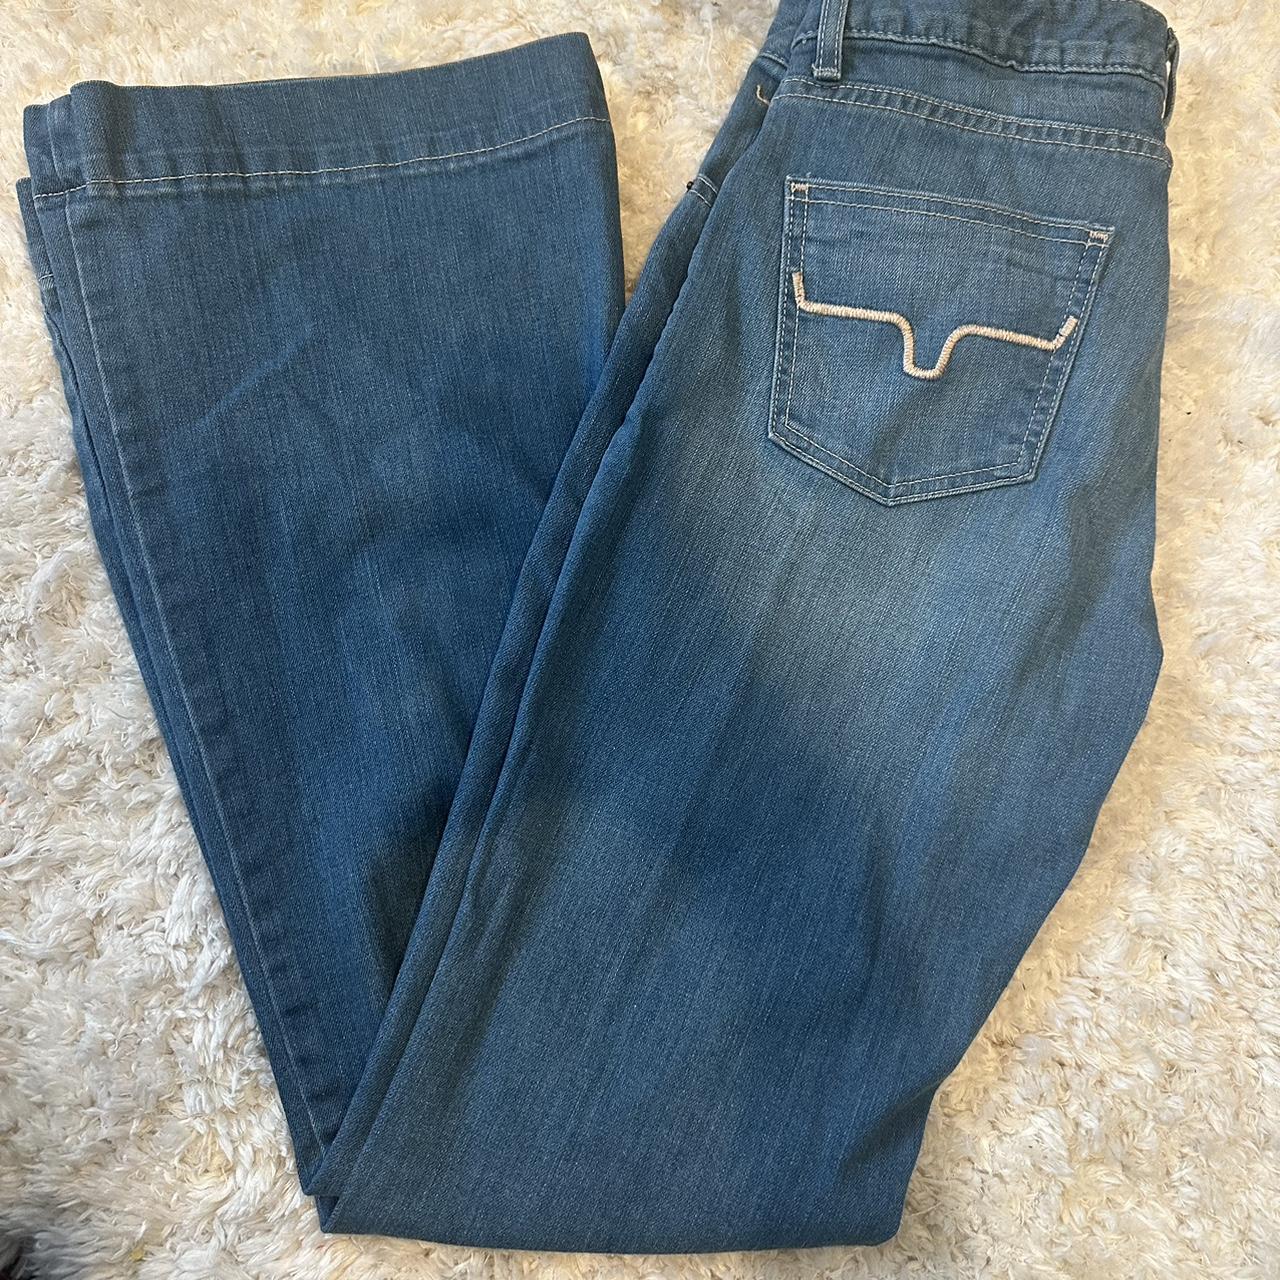 Lola kimes jeans! Tried on but didn’t fit:( size... - Depop